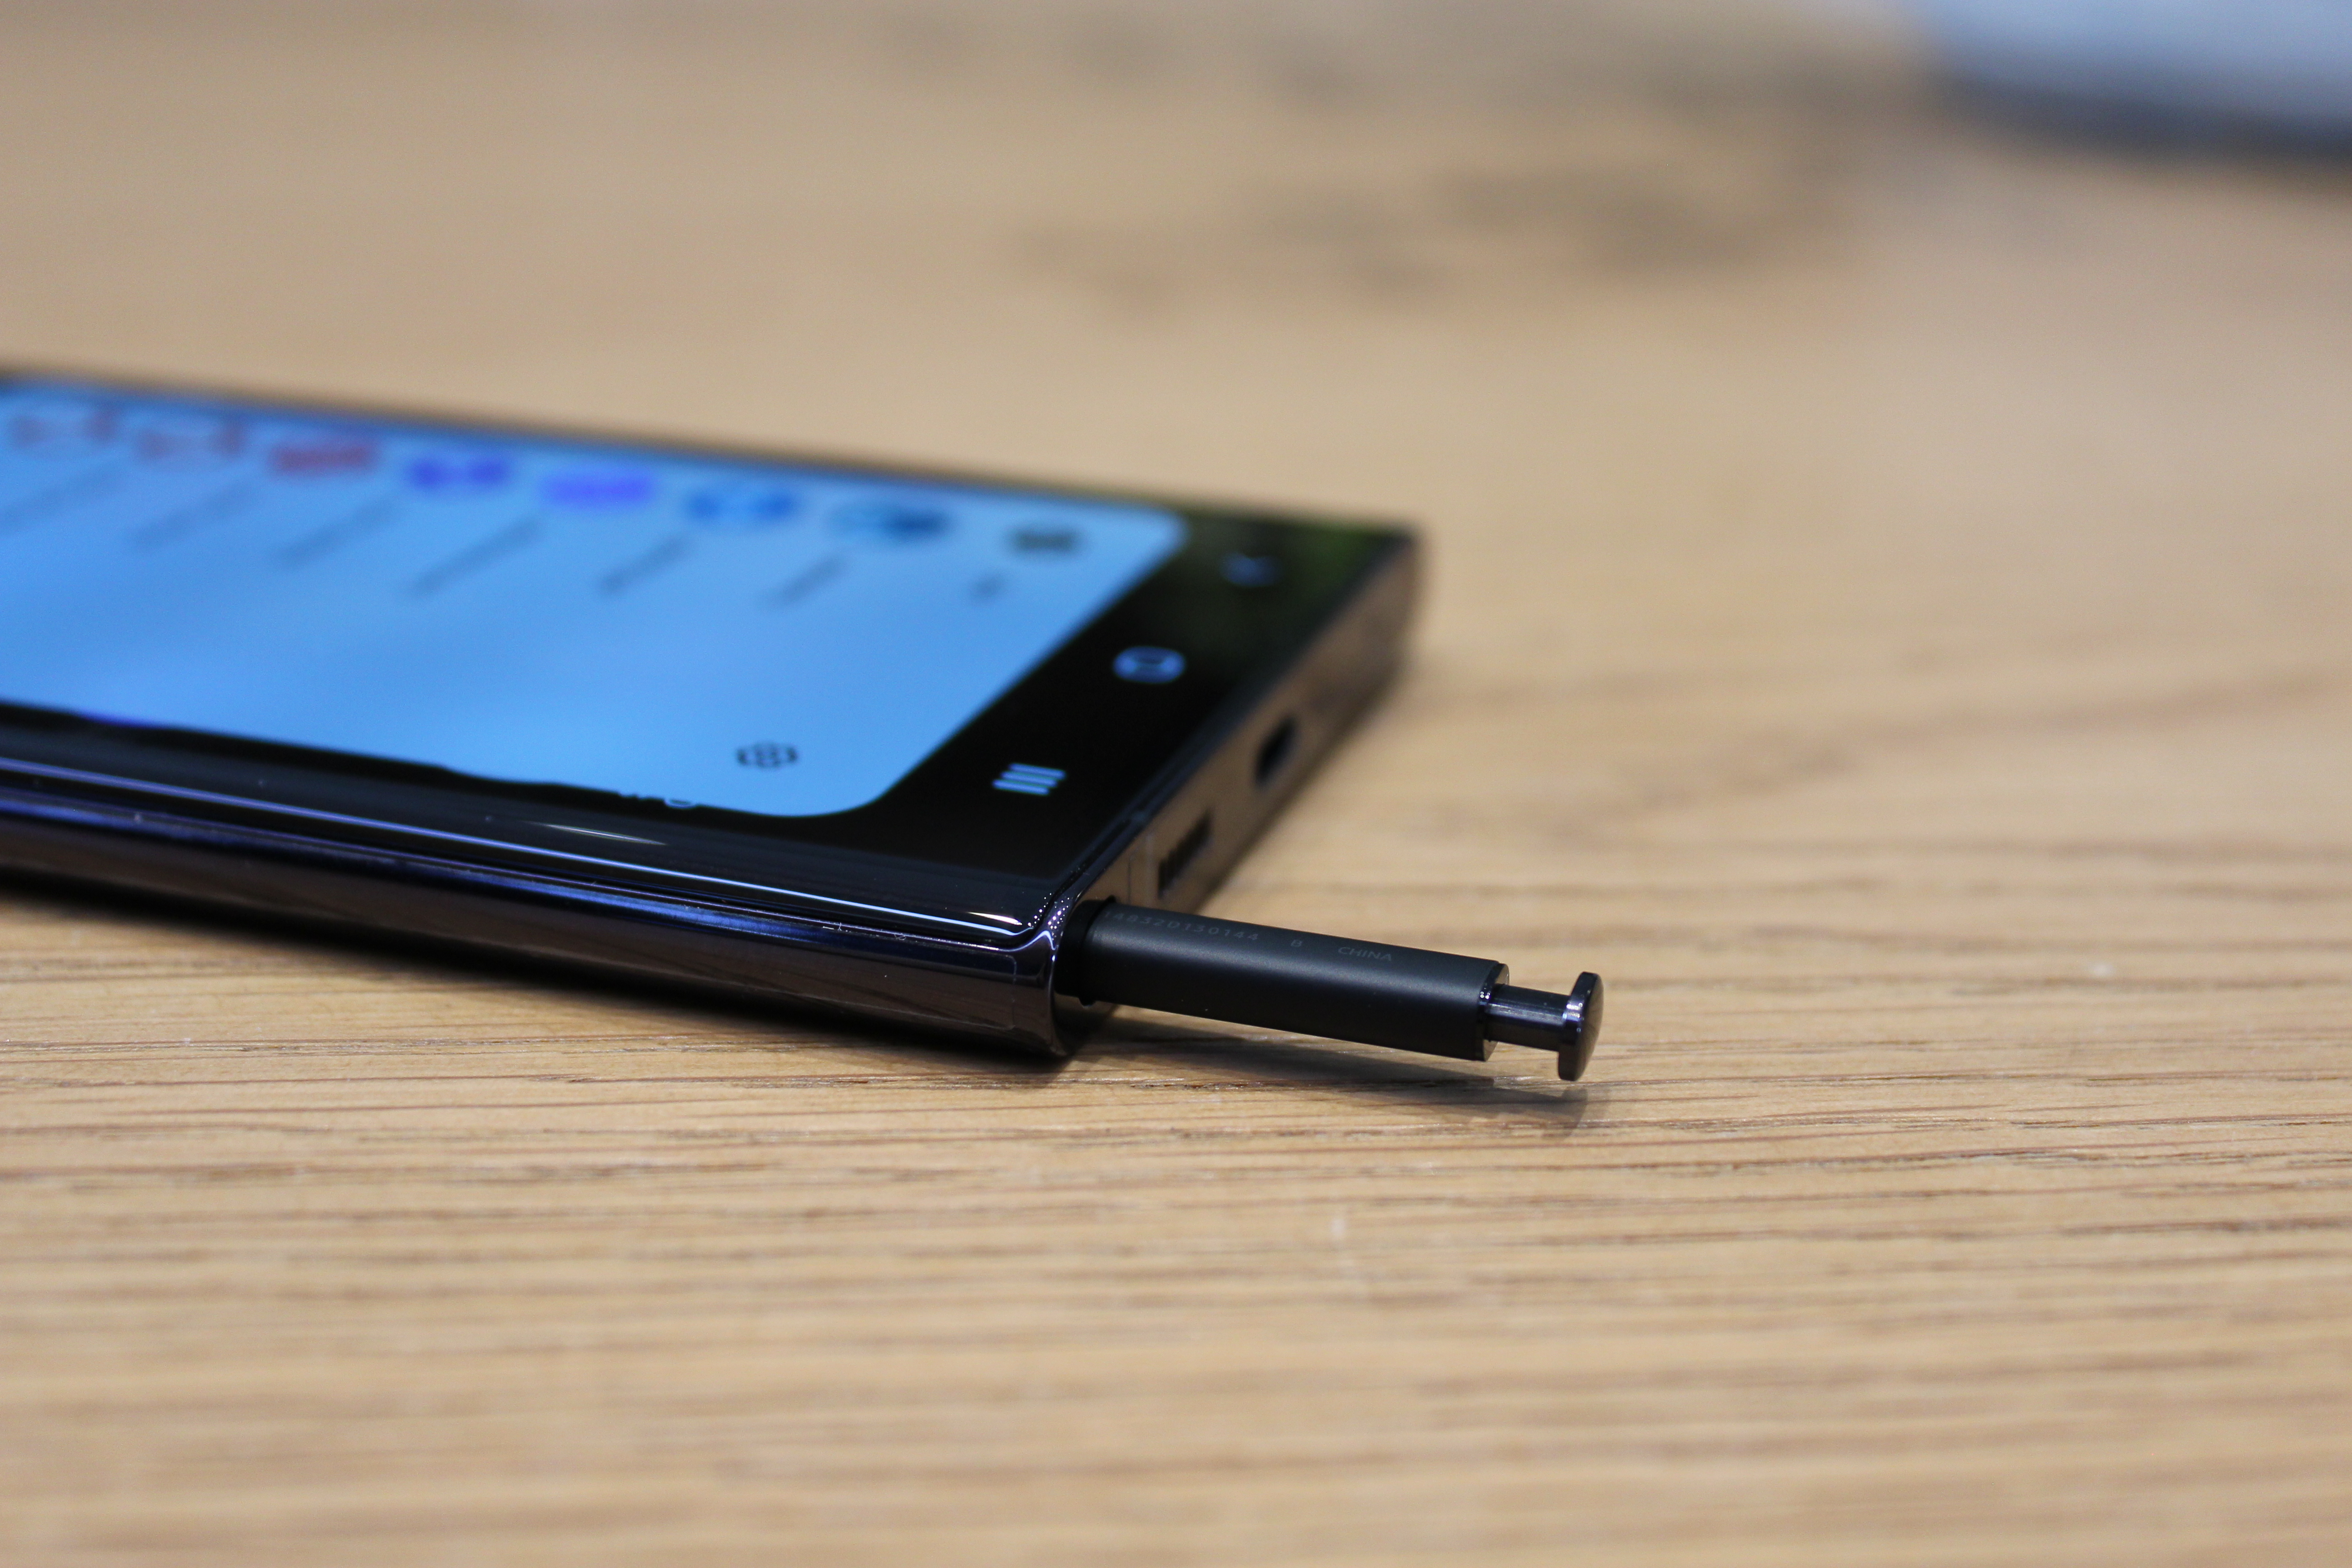 The S Pen stylus slotting into the Samsung Galaxy S22 Ultra